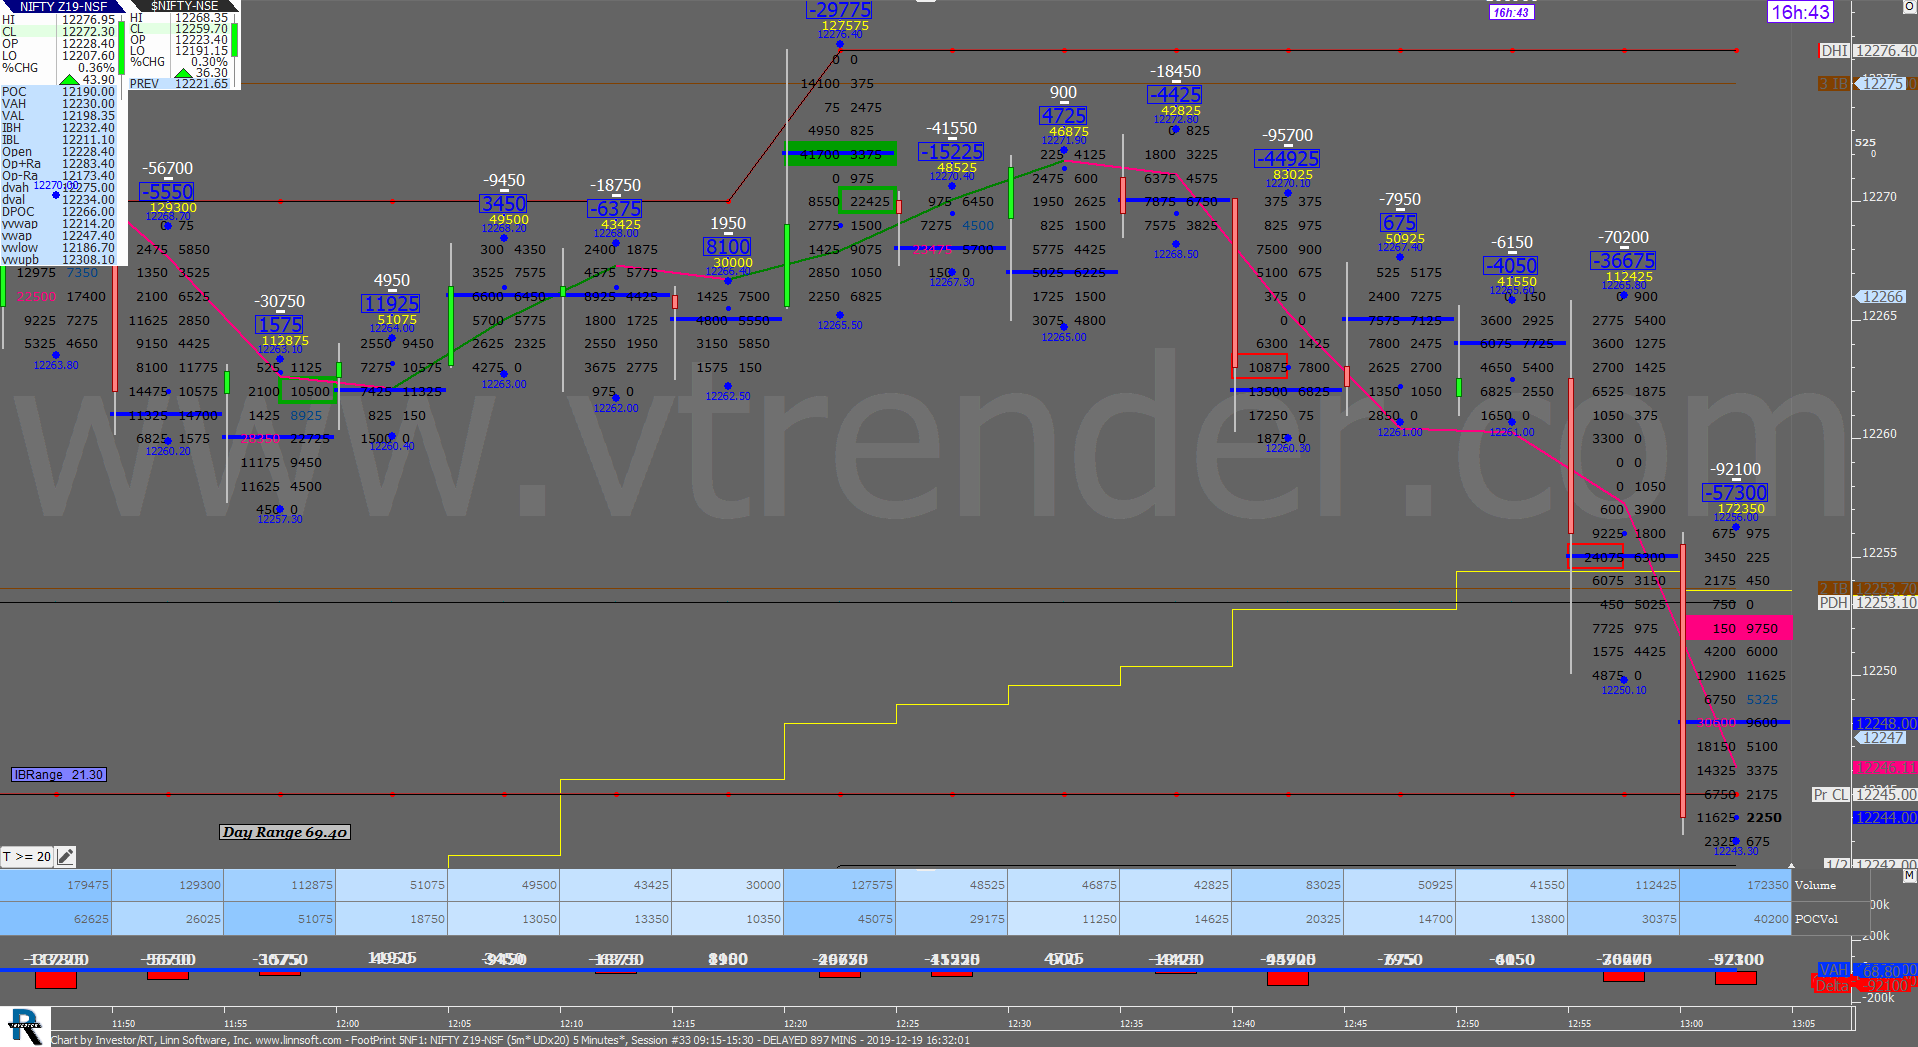 3 26 Order Flow Charts Dated 19Th Dec (5 Mins) Banknifty Futures, Day Trading, Intraday Trading, Intraday Trading Strategies, Nifty Futures, Order Flow Analysis, Support And Resistance, Trading Strategies, Volume Profile Trading